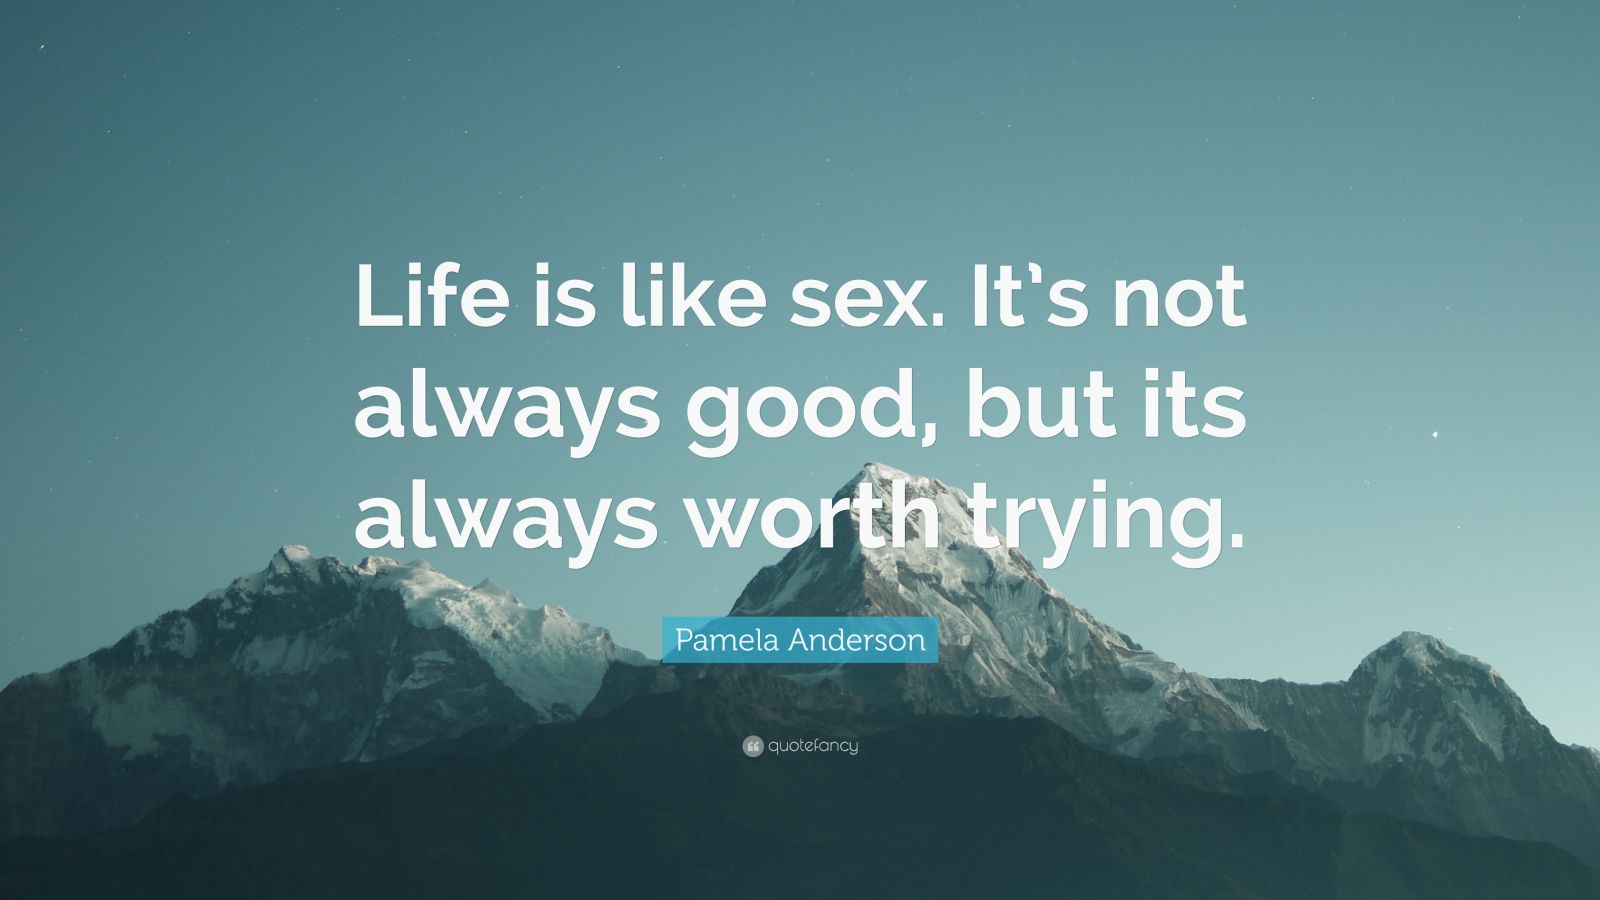 Pamela Anderson Quote “life Is Like Sex Its Not Always Good But Its Always Worth Trying” 9 